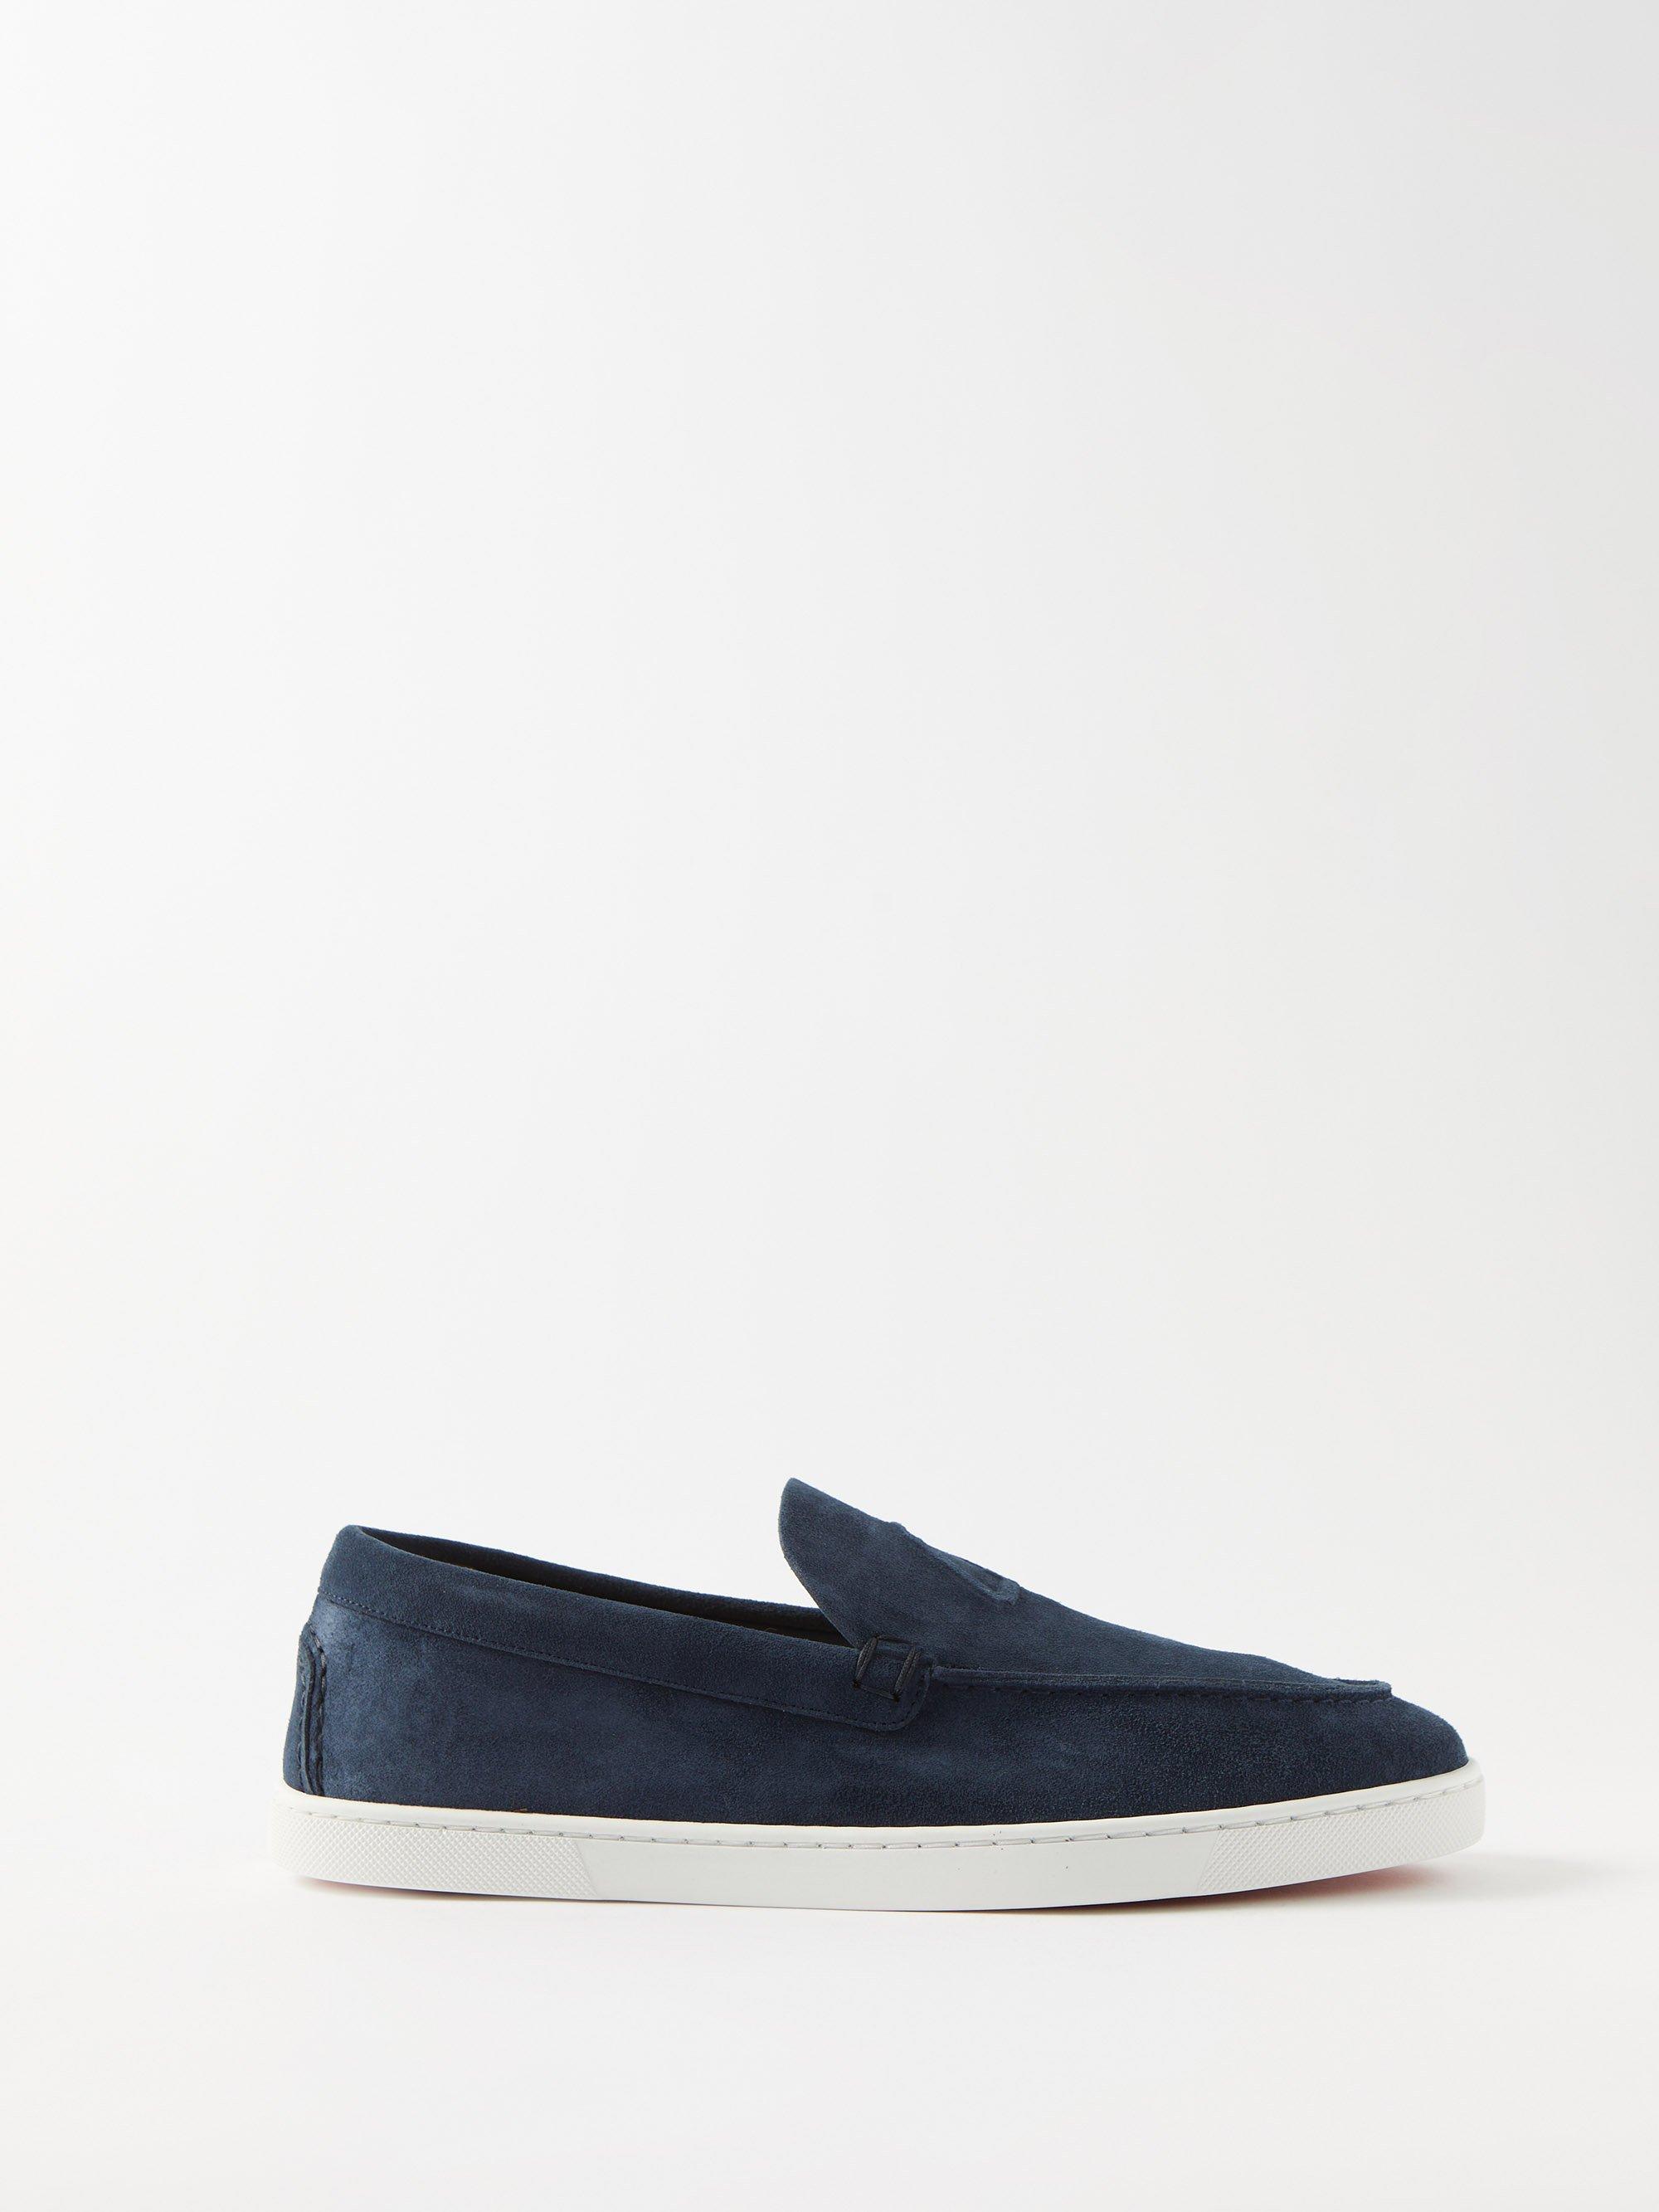 Christian Louboutin Varsiboat Suede Loafers in Blue for Men | Lyst